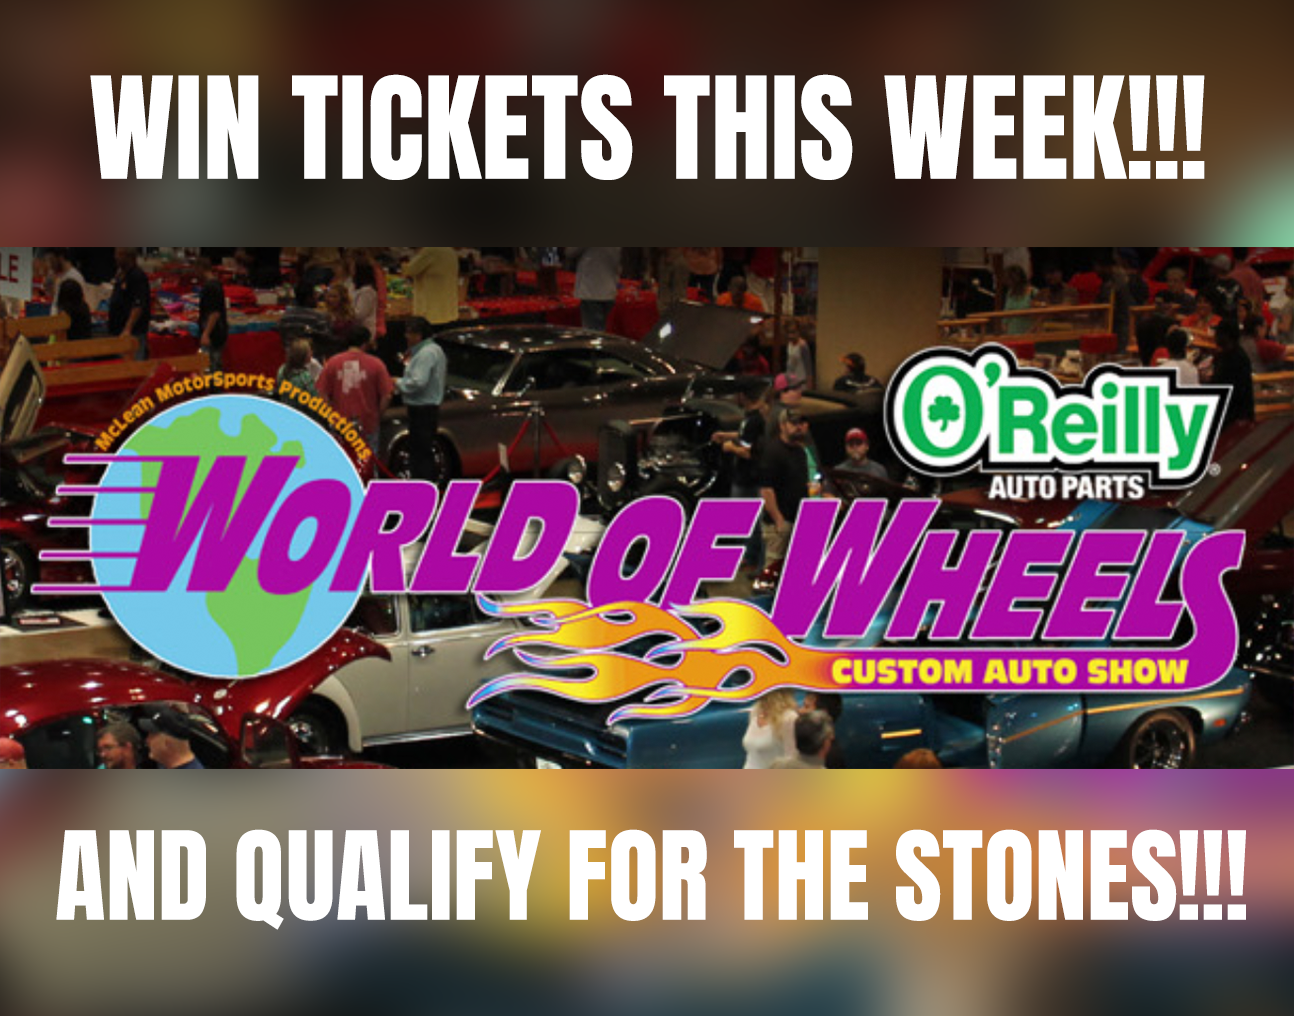 Win O’Reilly Auto Parts World of Wheels Tickets!